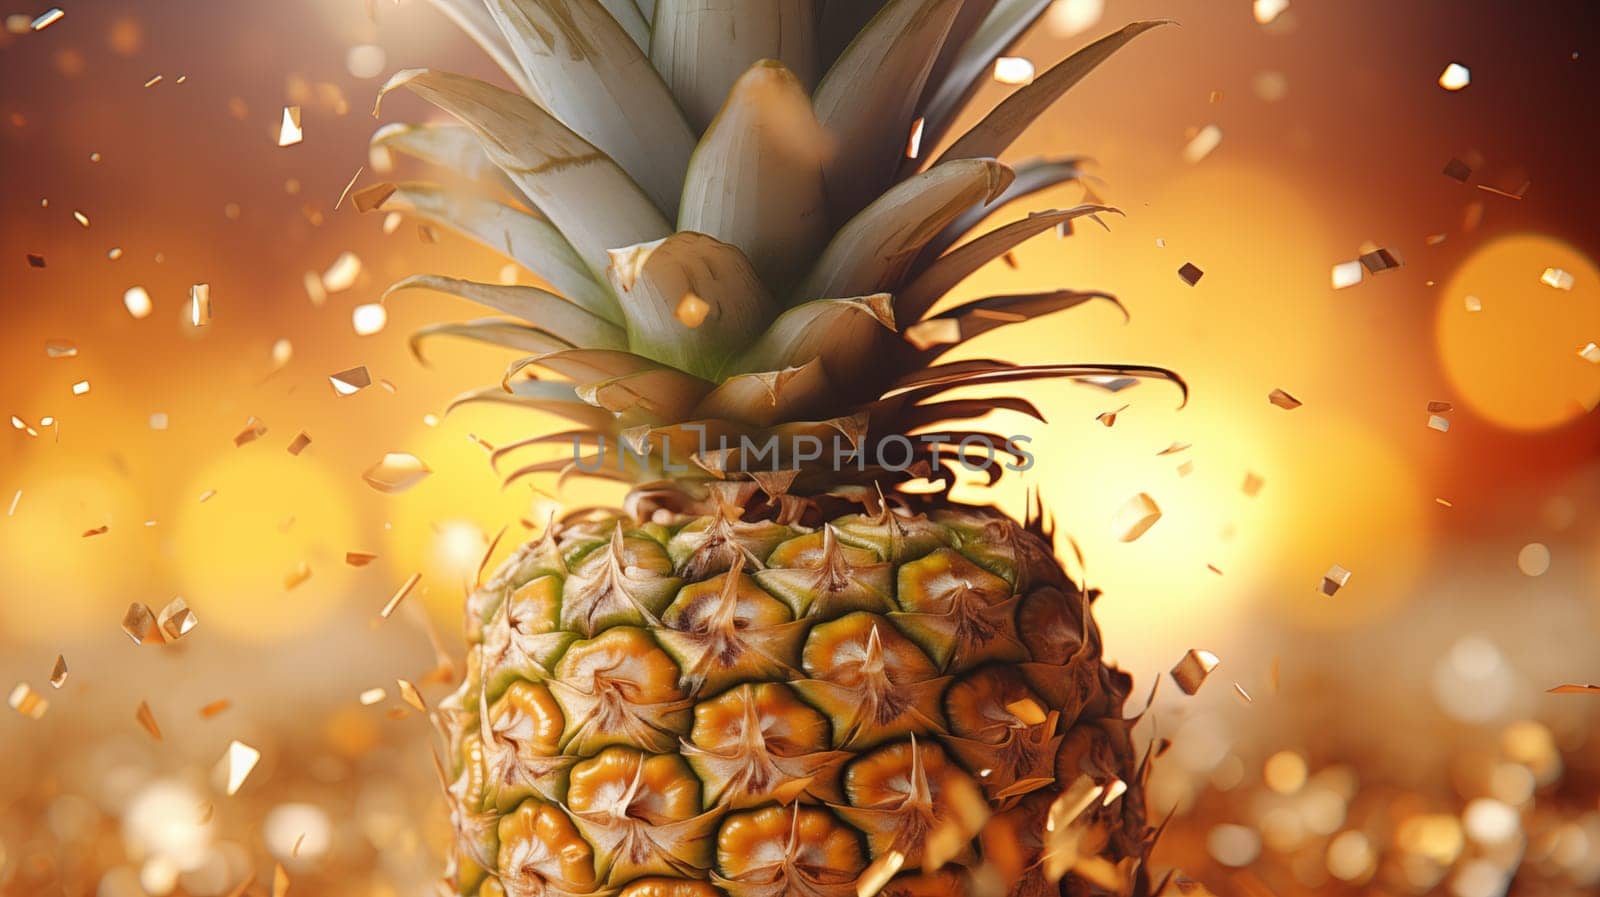 A pineapple stands on a yellow background with a bokeh, golden confetti falls from above.